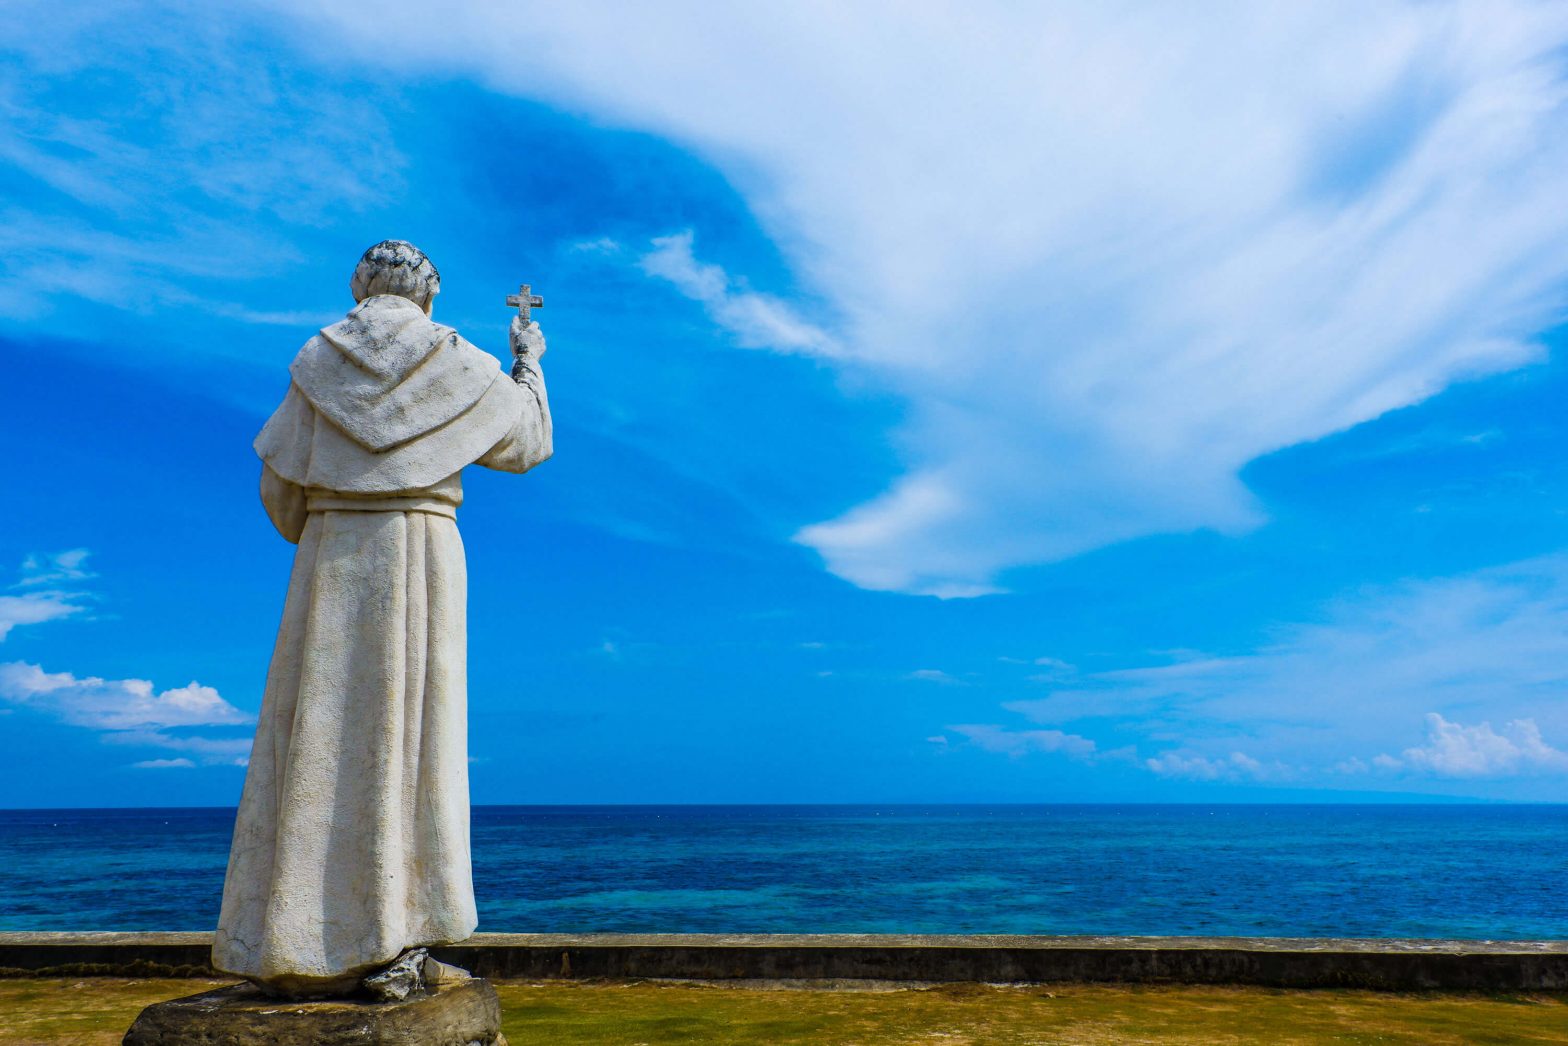 In Oslob, Fr. Bermejo looks out to sea he protected in his lifetime